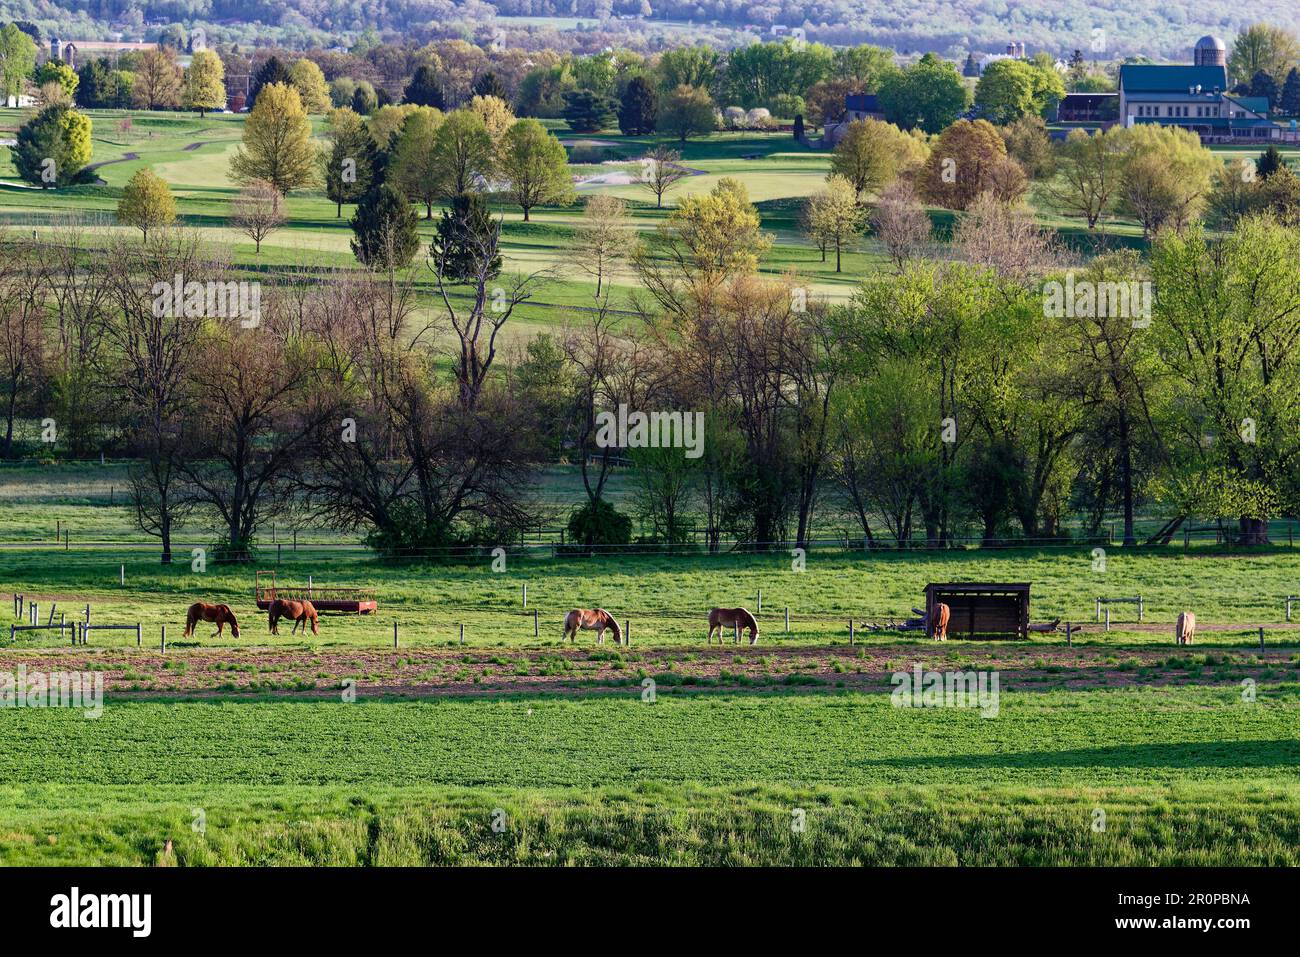 rural scene, farm, 6 horses grazing, green grass, trees, Honey Brook Golf Course beyond, gentle hill, golden light, early morning, peaceful, equines, Stock Photo